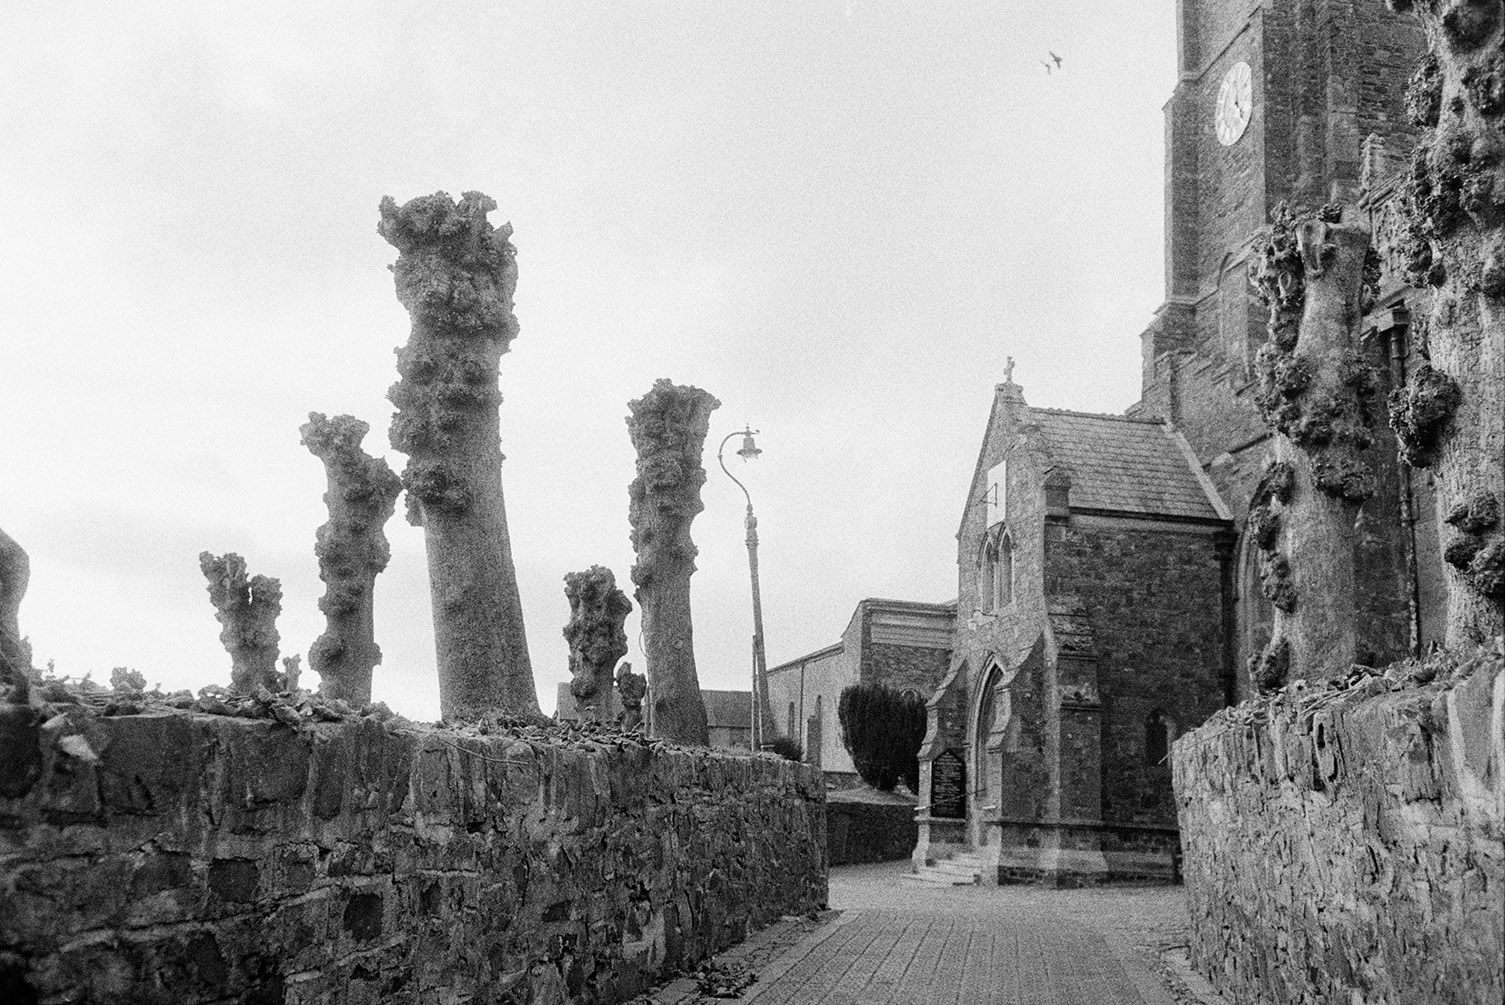 Pollarded trees outside South Molton church with a clock and sundial on the church tower and porch.